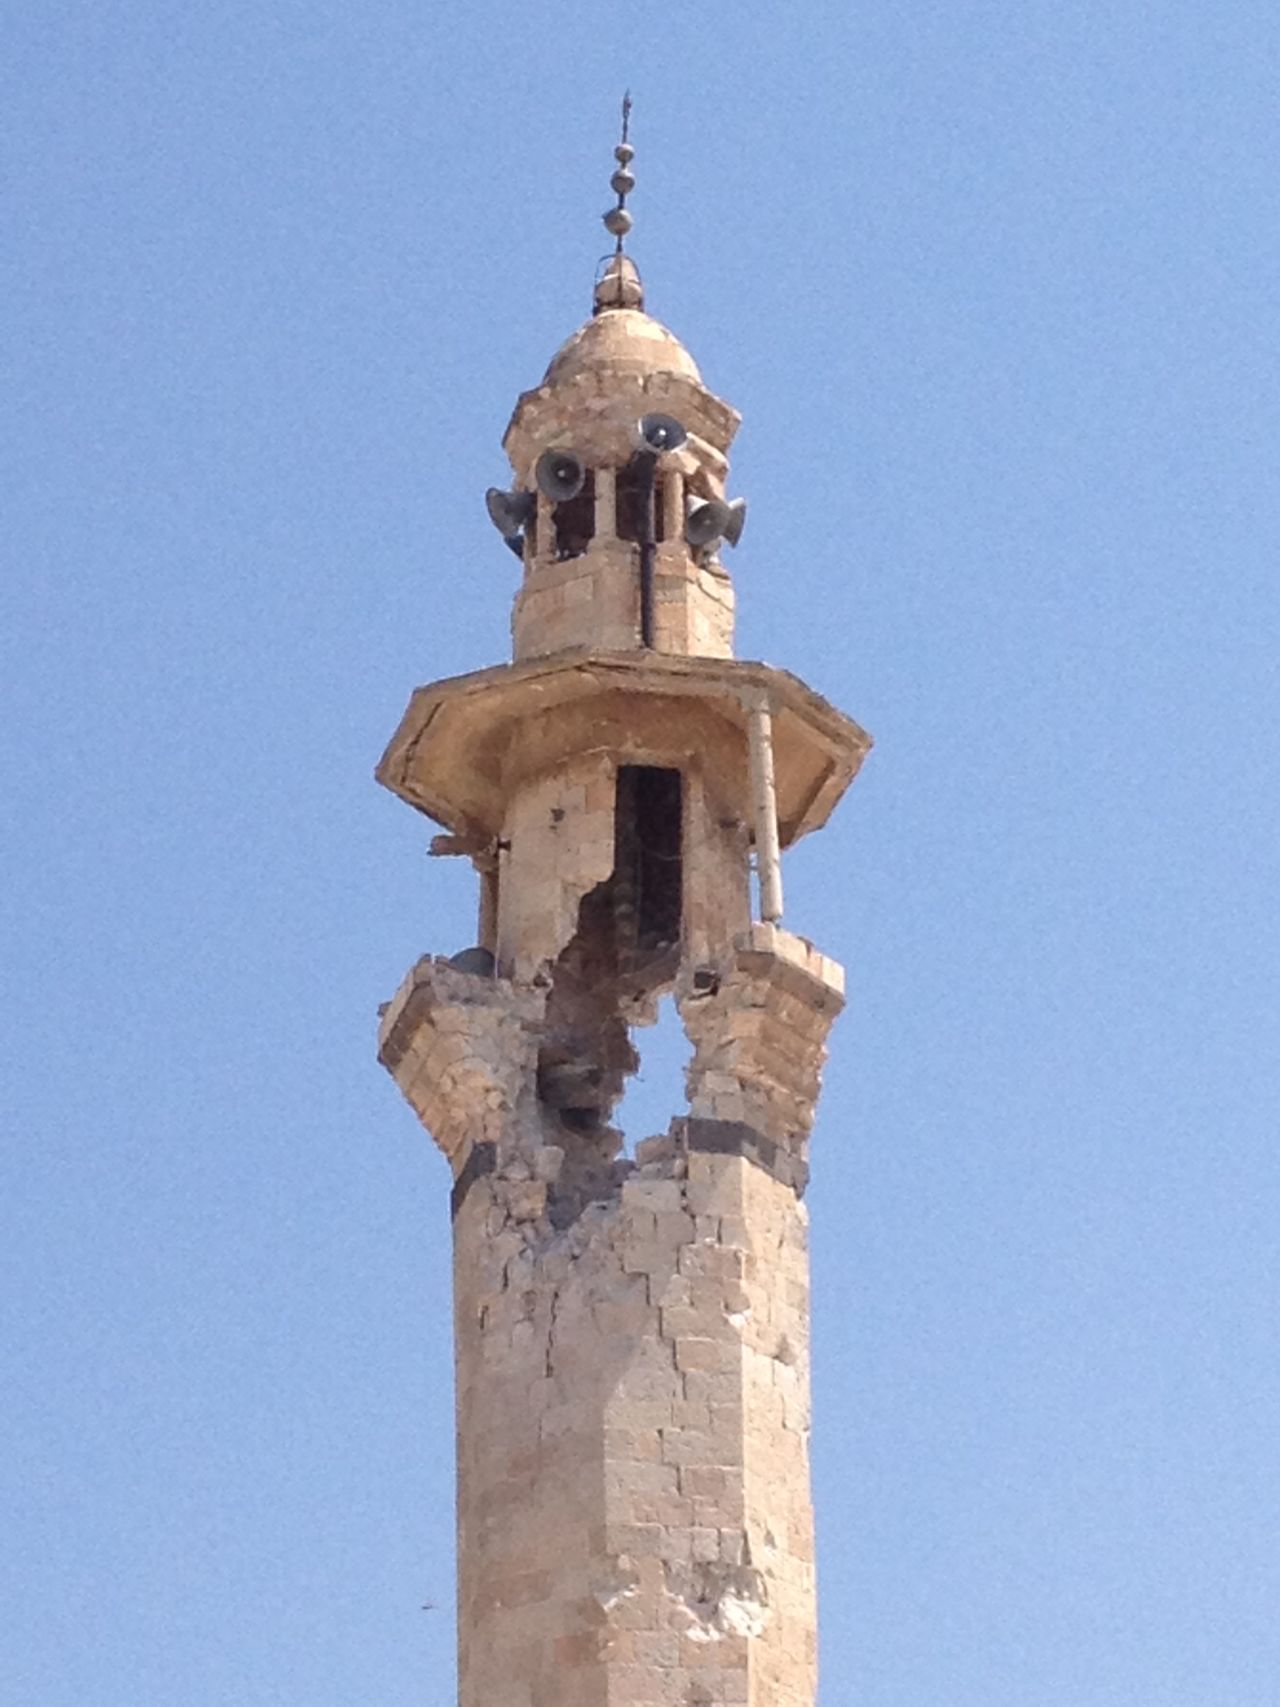 The mosque's minaret has a gaping hole after being hit by a shell. 